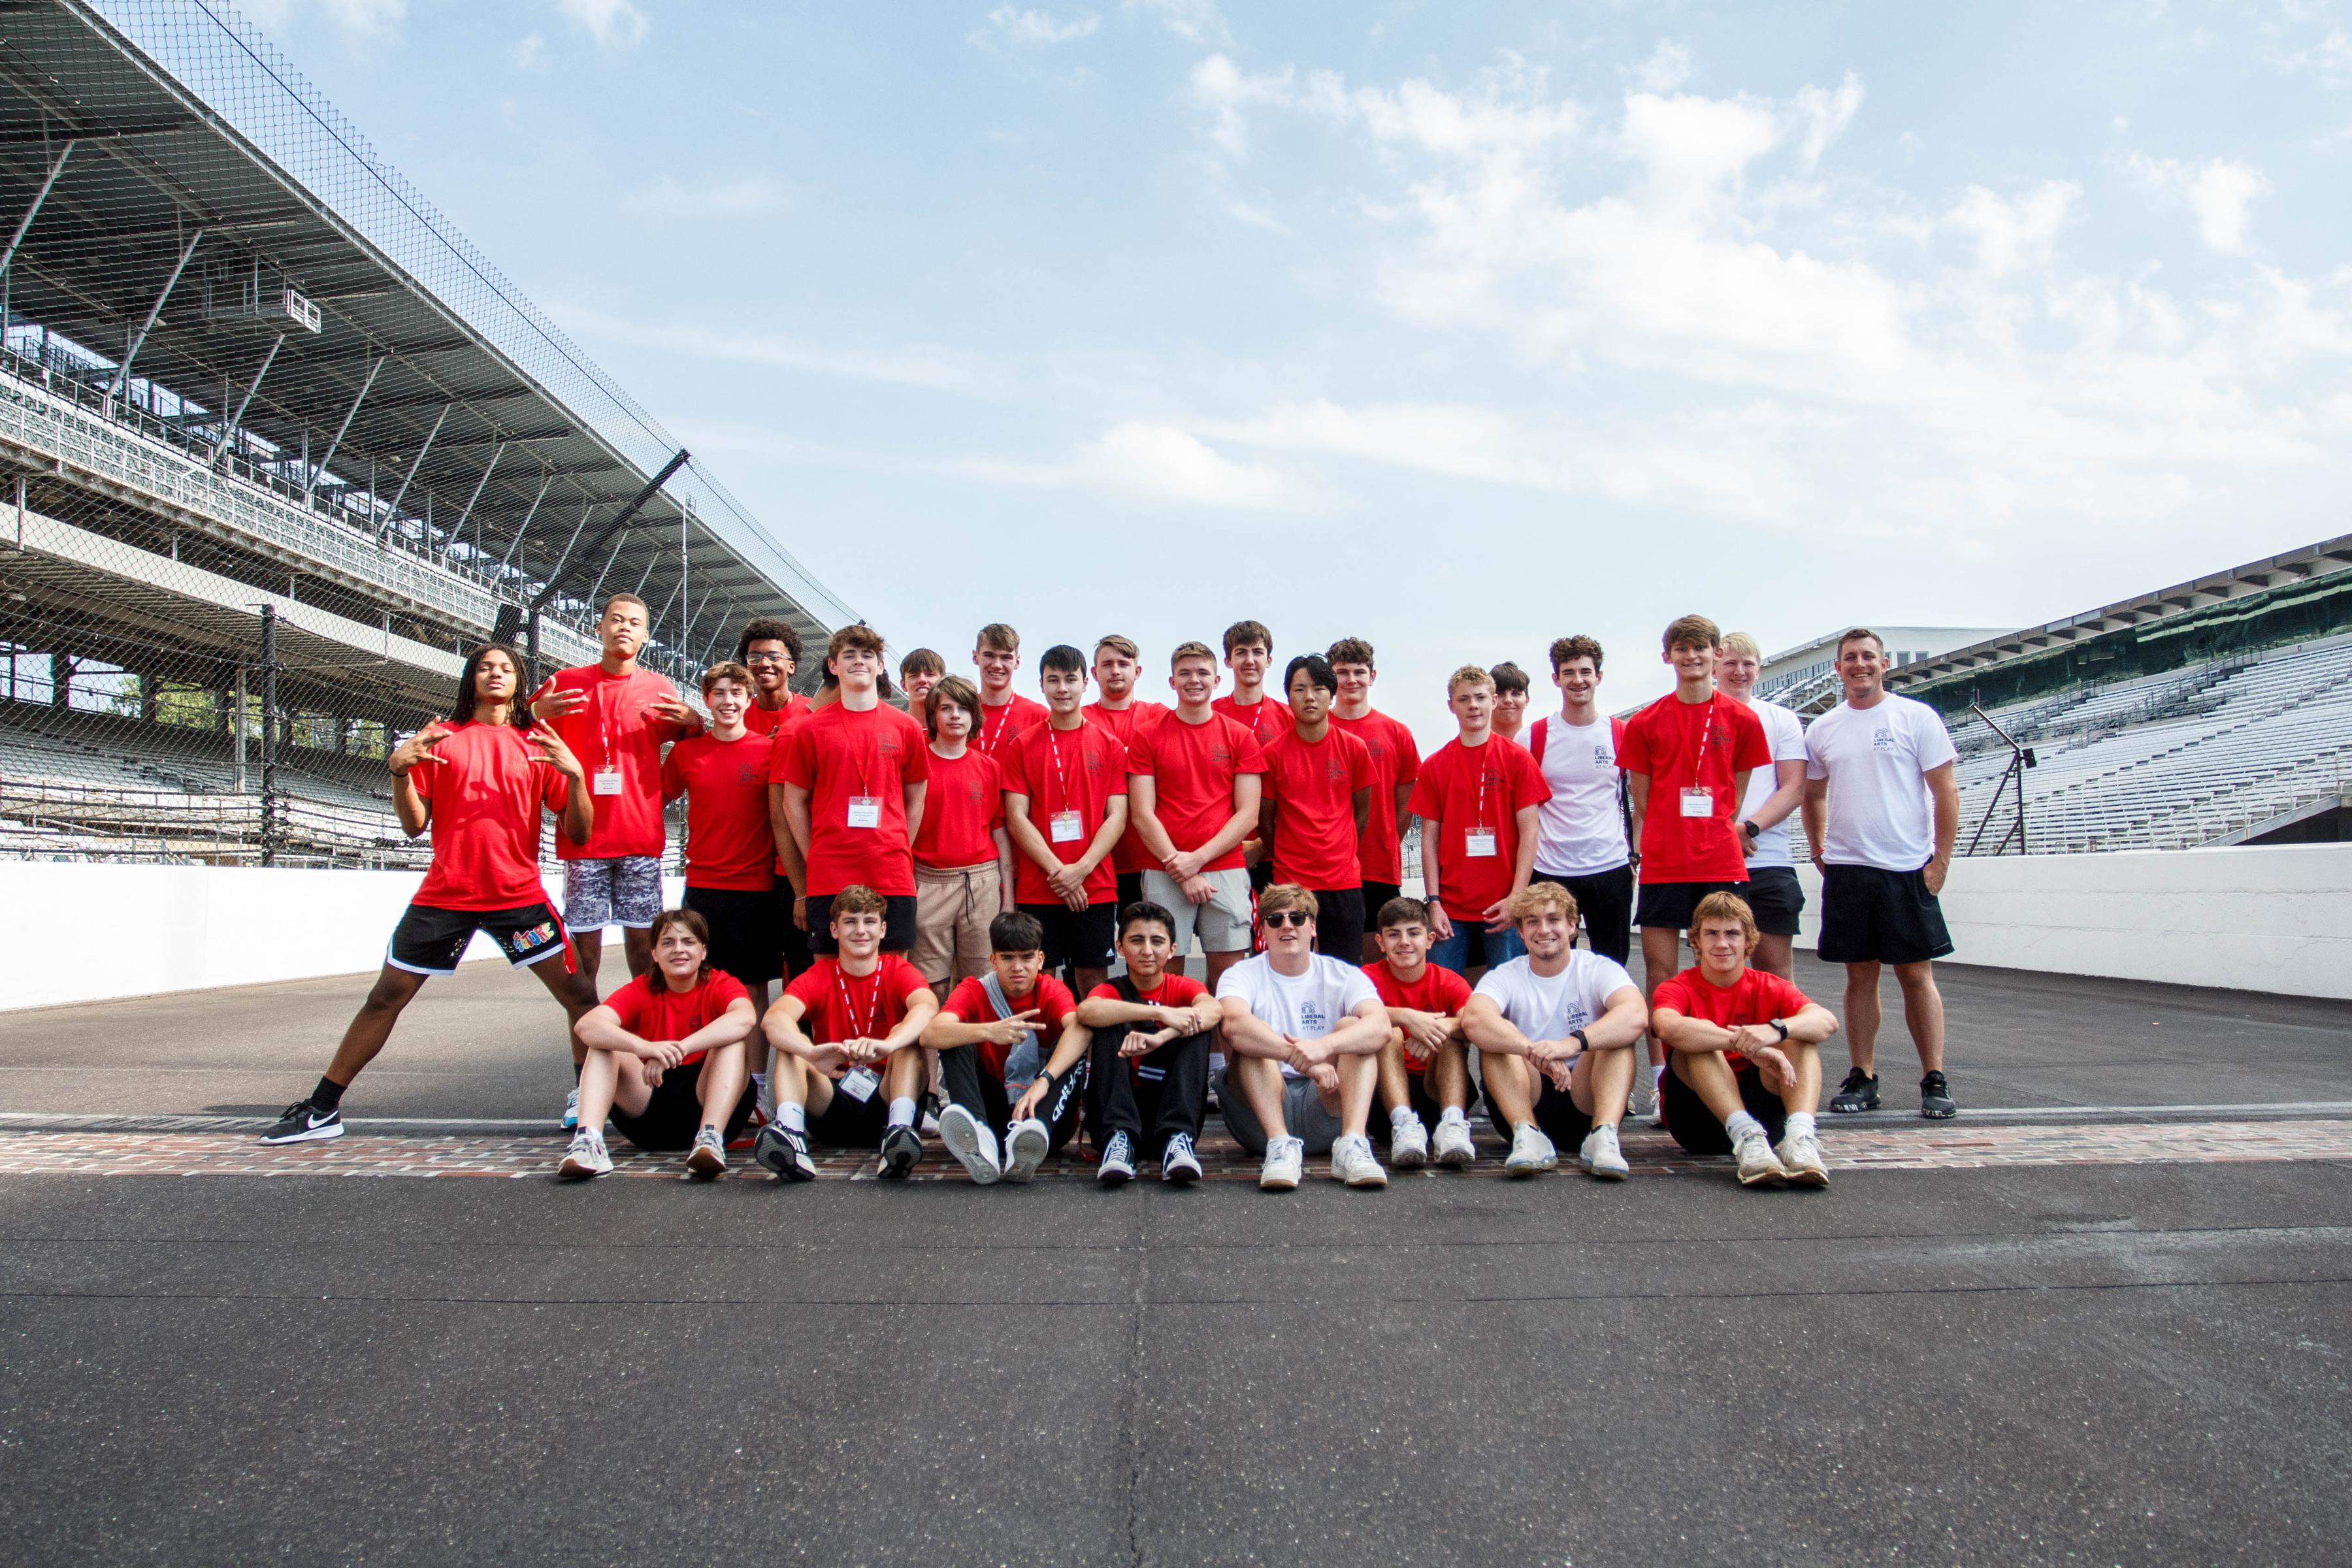 Liberal Arts at Play students participated in two days of immersion trips around Indianapolis, which included a special visit to the Indianapolis Motor Speedway. 